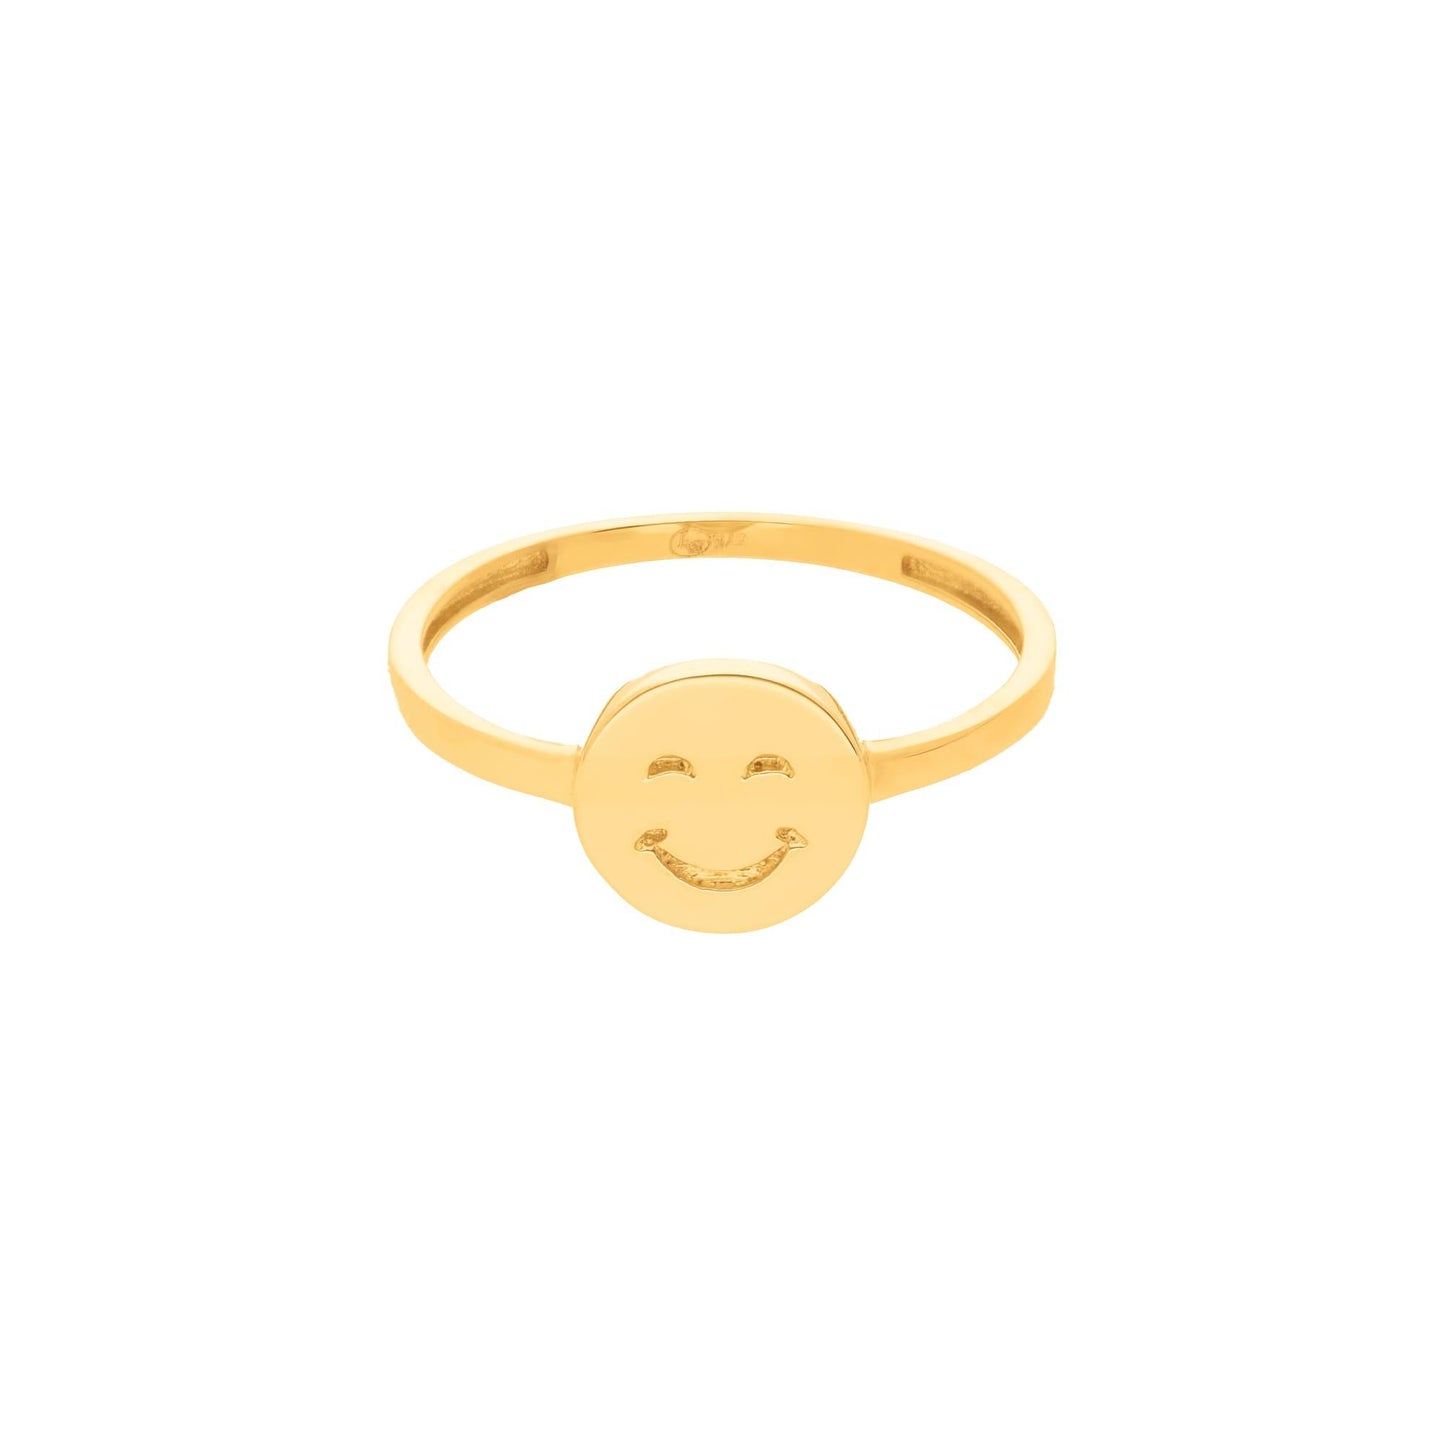 Smiley Ring - suzangold